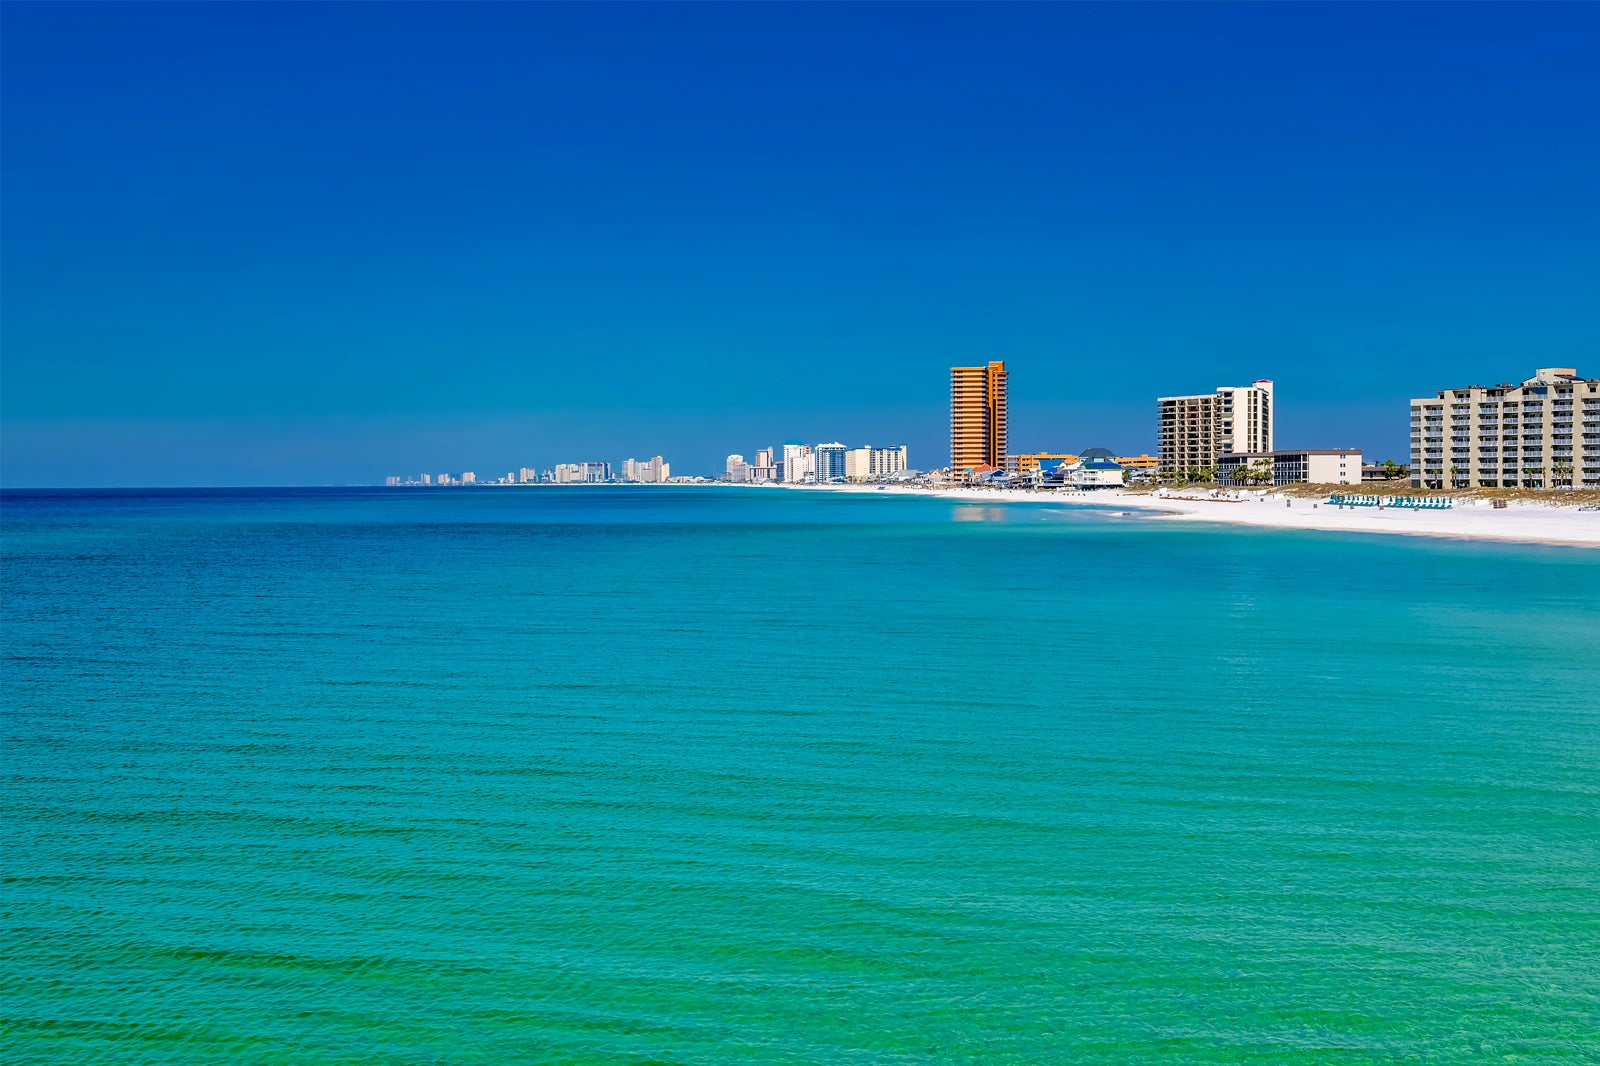 What Beach Events Take Place In Panama City Beach Throughout The Year?